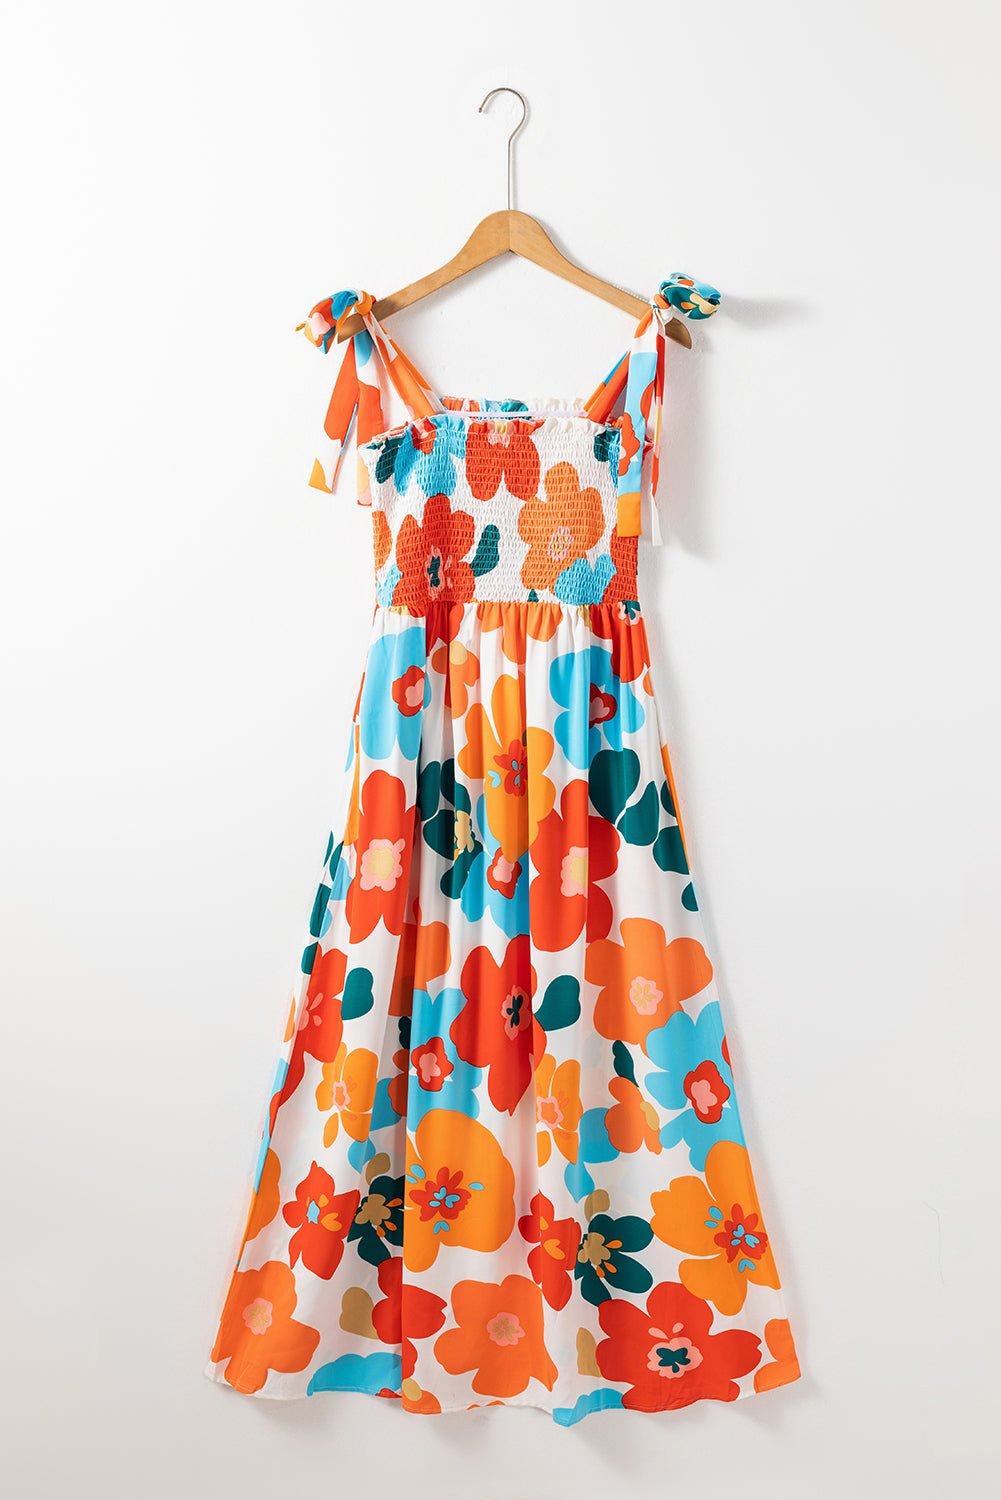 The image is showcasing a Women Floral Self Tied Straps Smocked Bust Maxi Dress With Pockets at Mommy & Lino's Closet